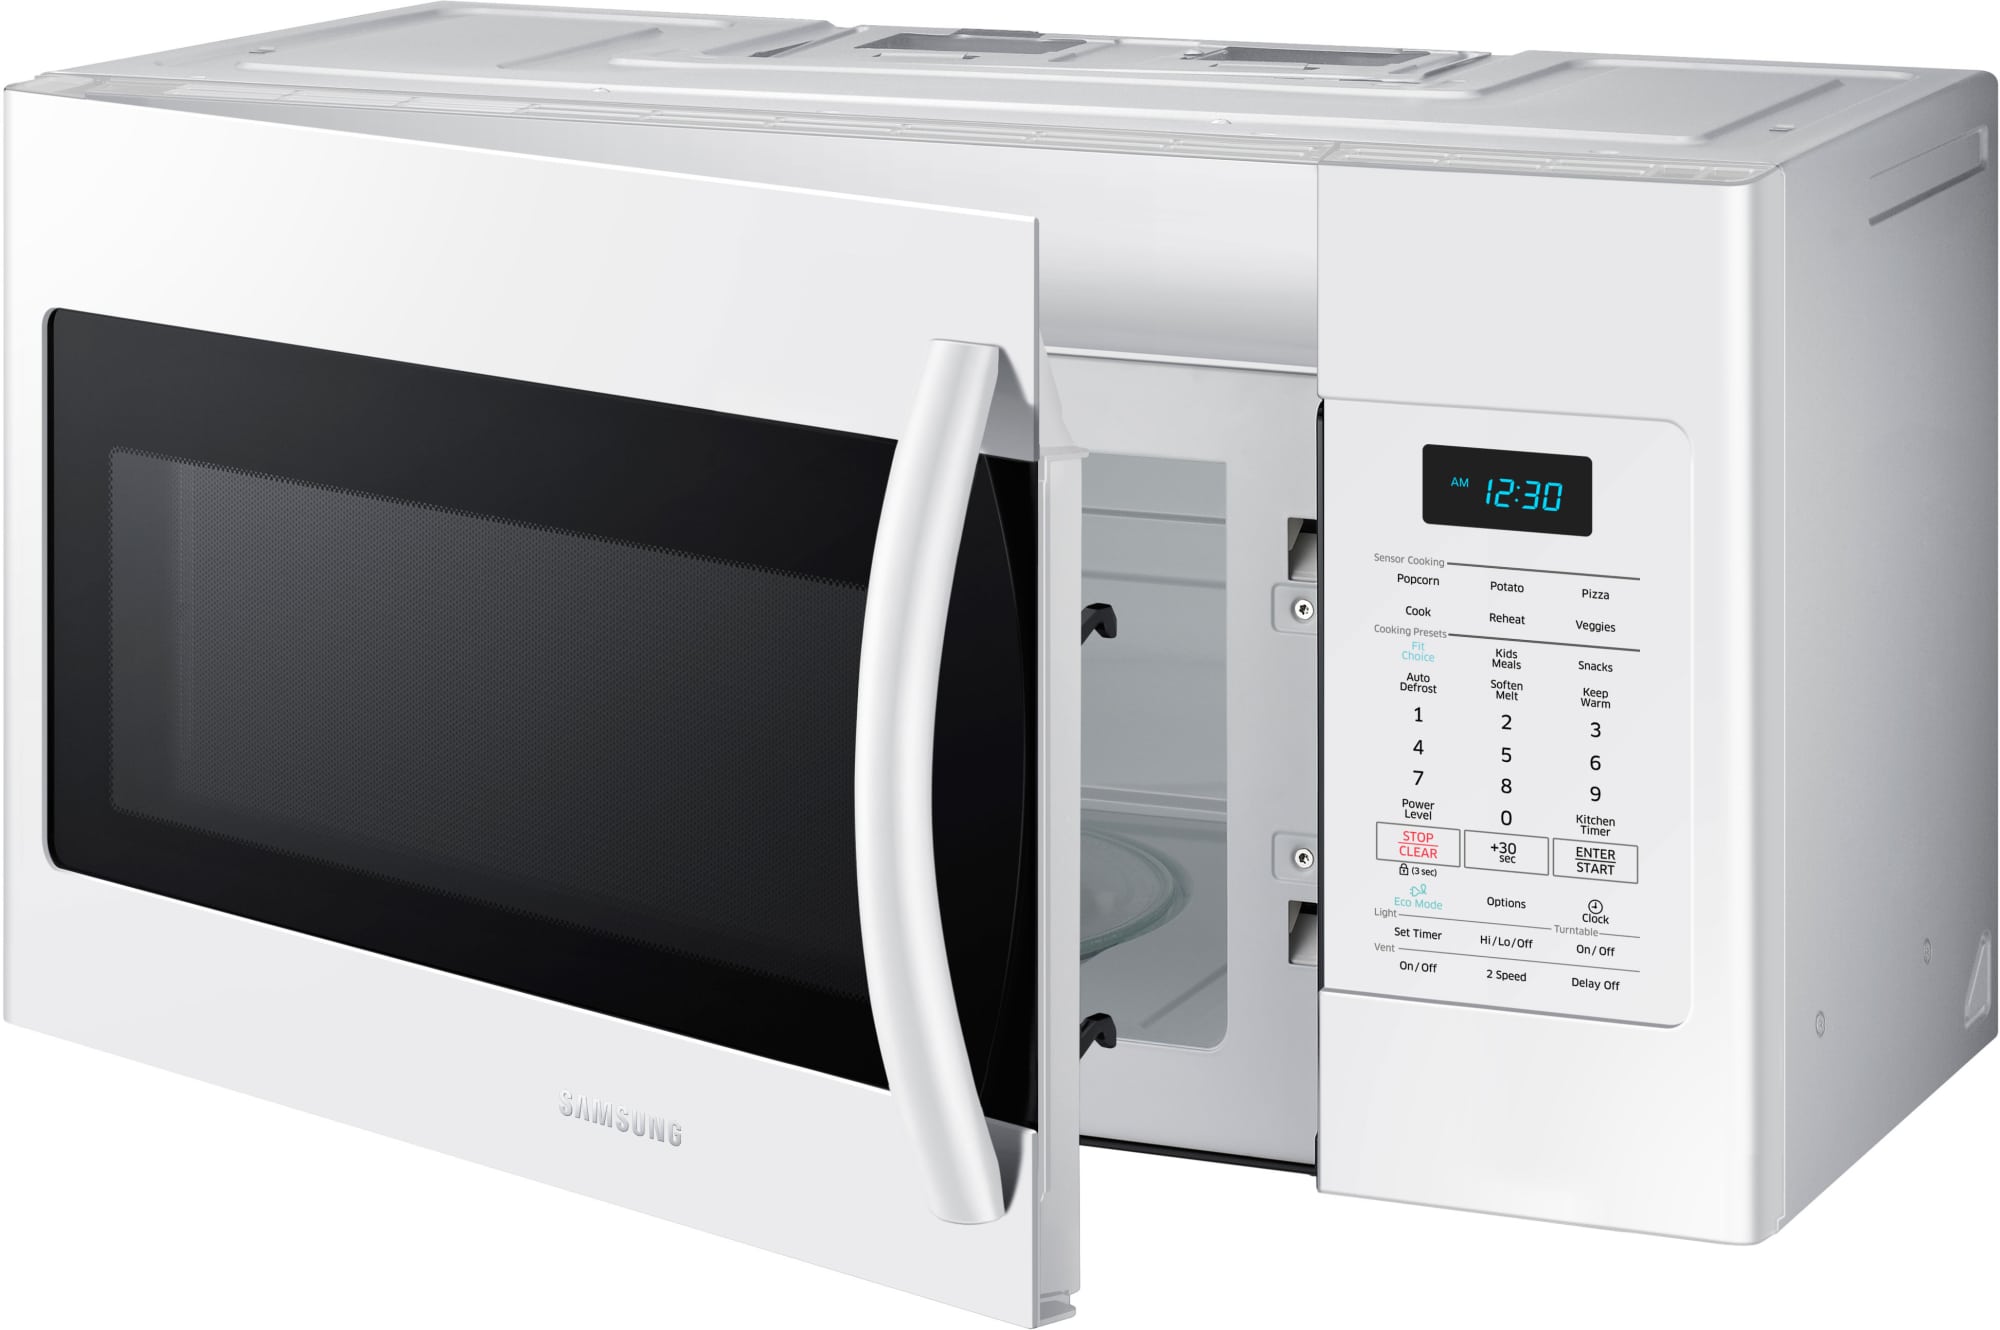 Samsung ME17H703SHW 1.7 cu. ft. Over-the-Range Microwave Oven with 1,000 Cooking Watts, 10 Power 